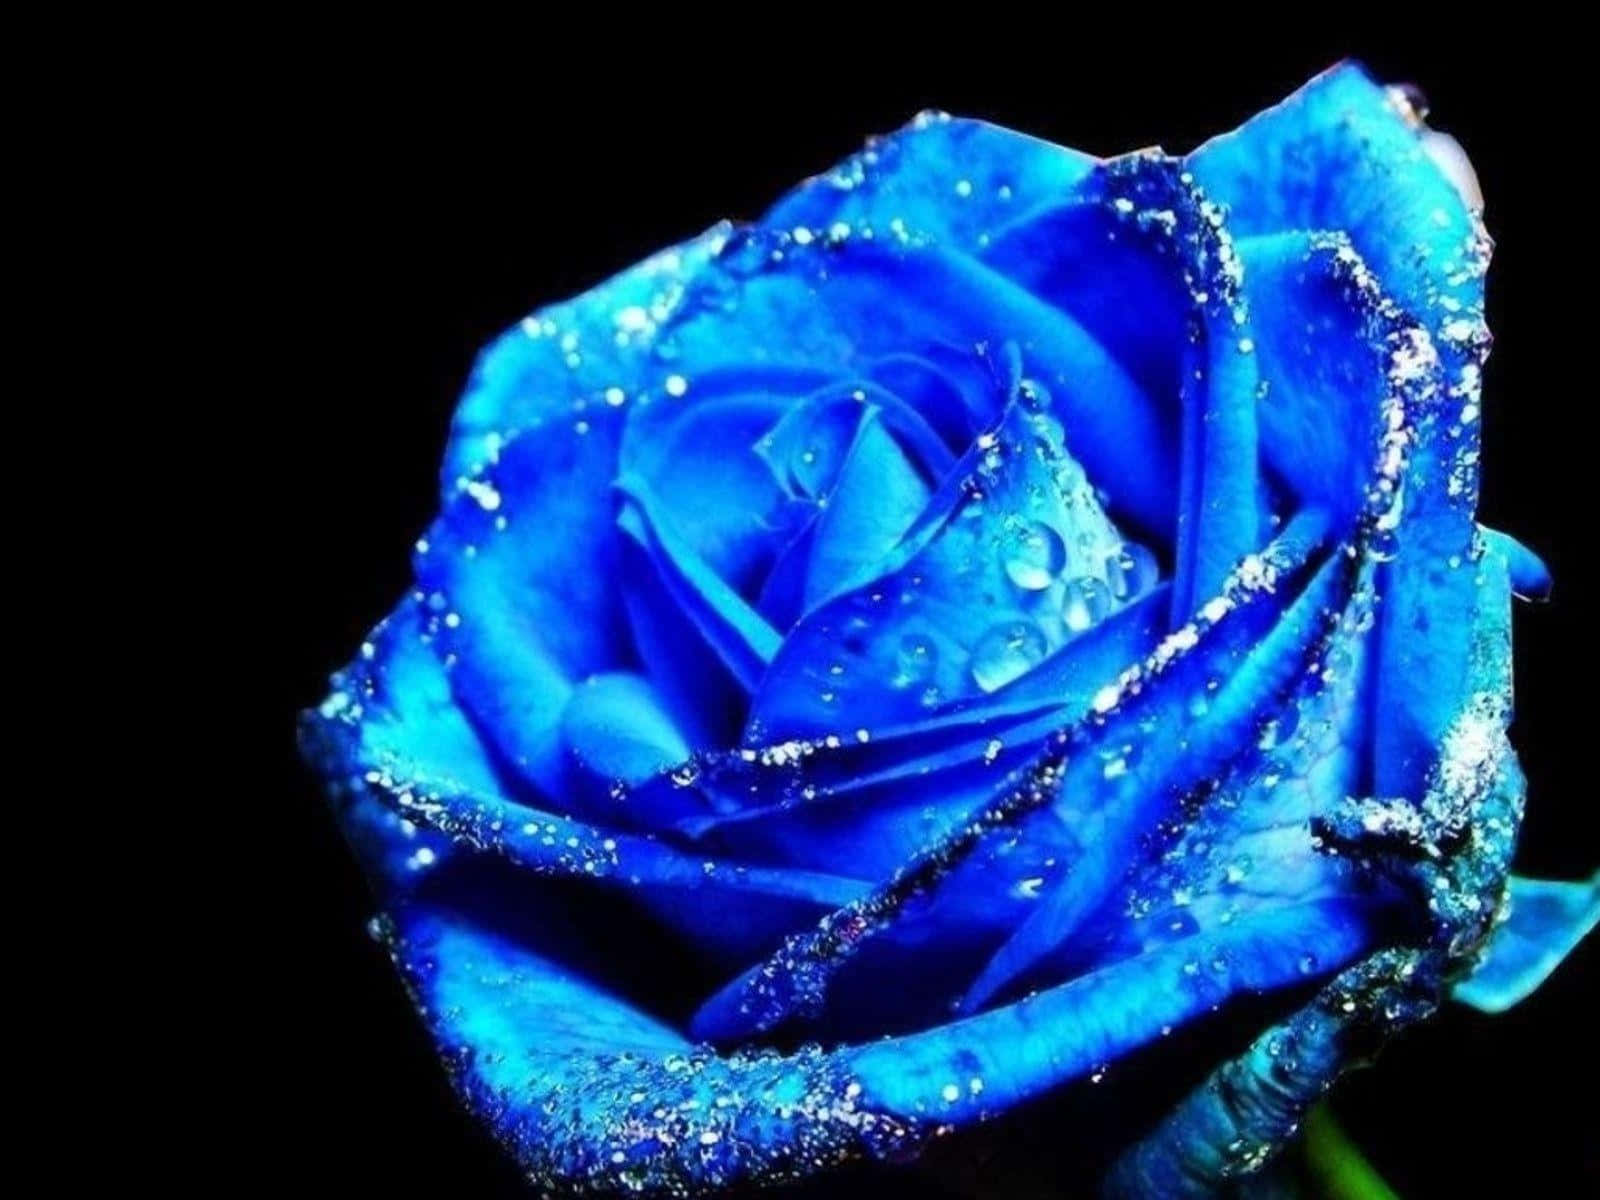 A rare and beautiful blue rose in full bloom Wallpaper